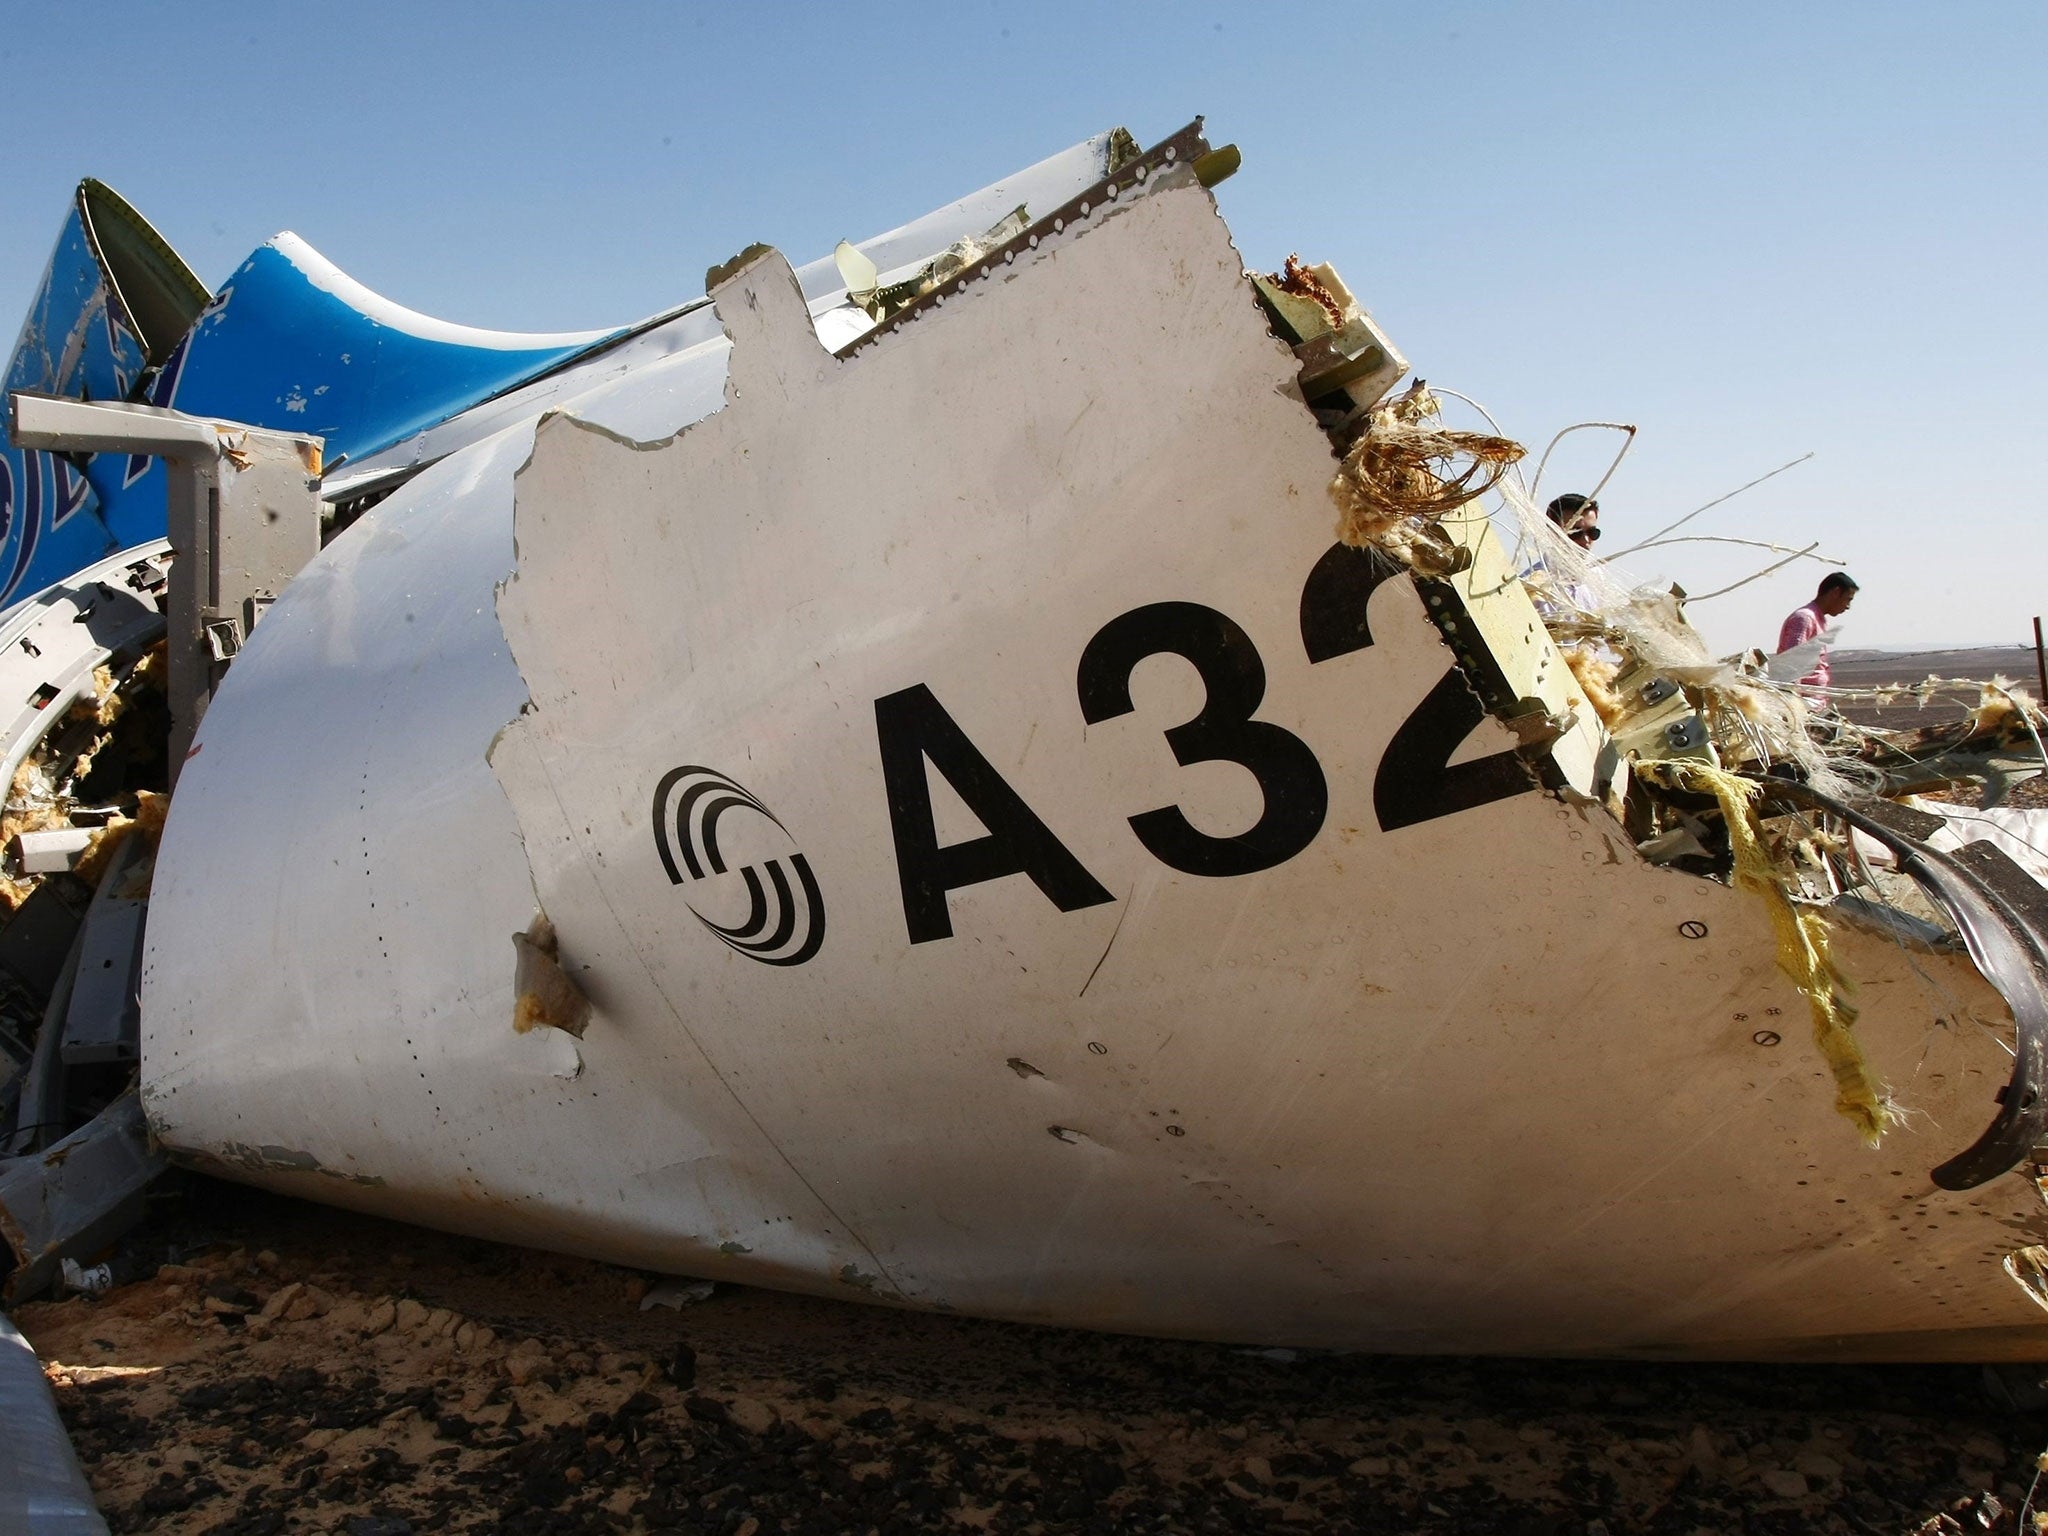 The wreckage of the A321 Russian airliner in Wadi al-Zolomat, a mountainous area of Egypt's Sinai Peninsula